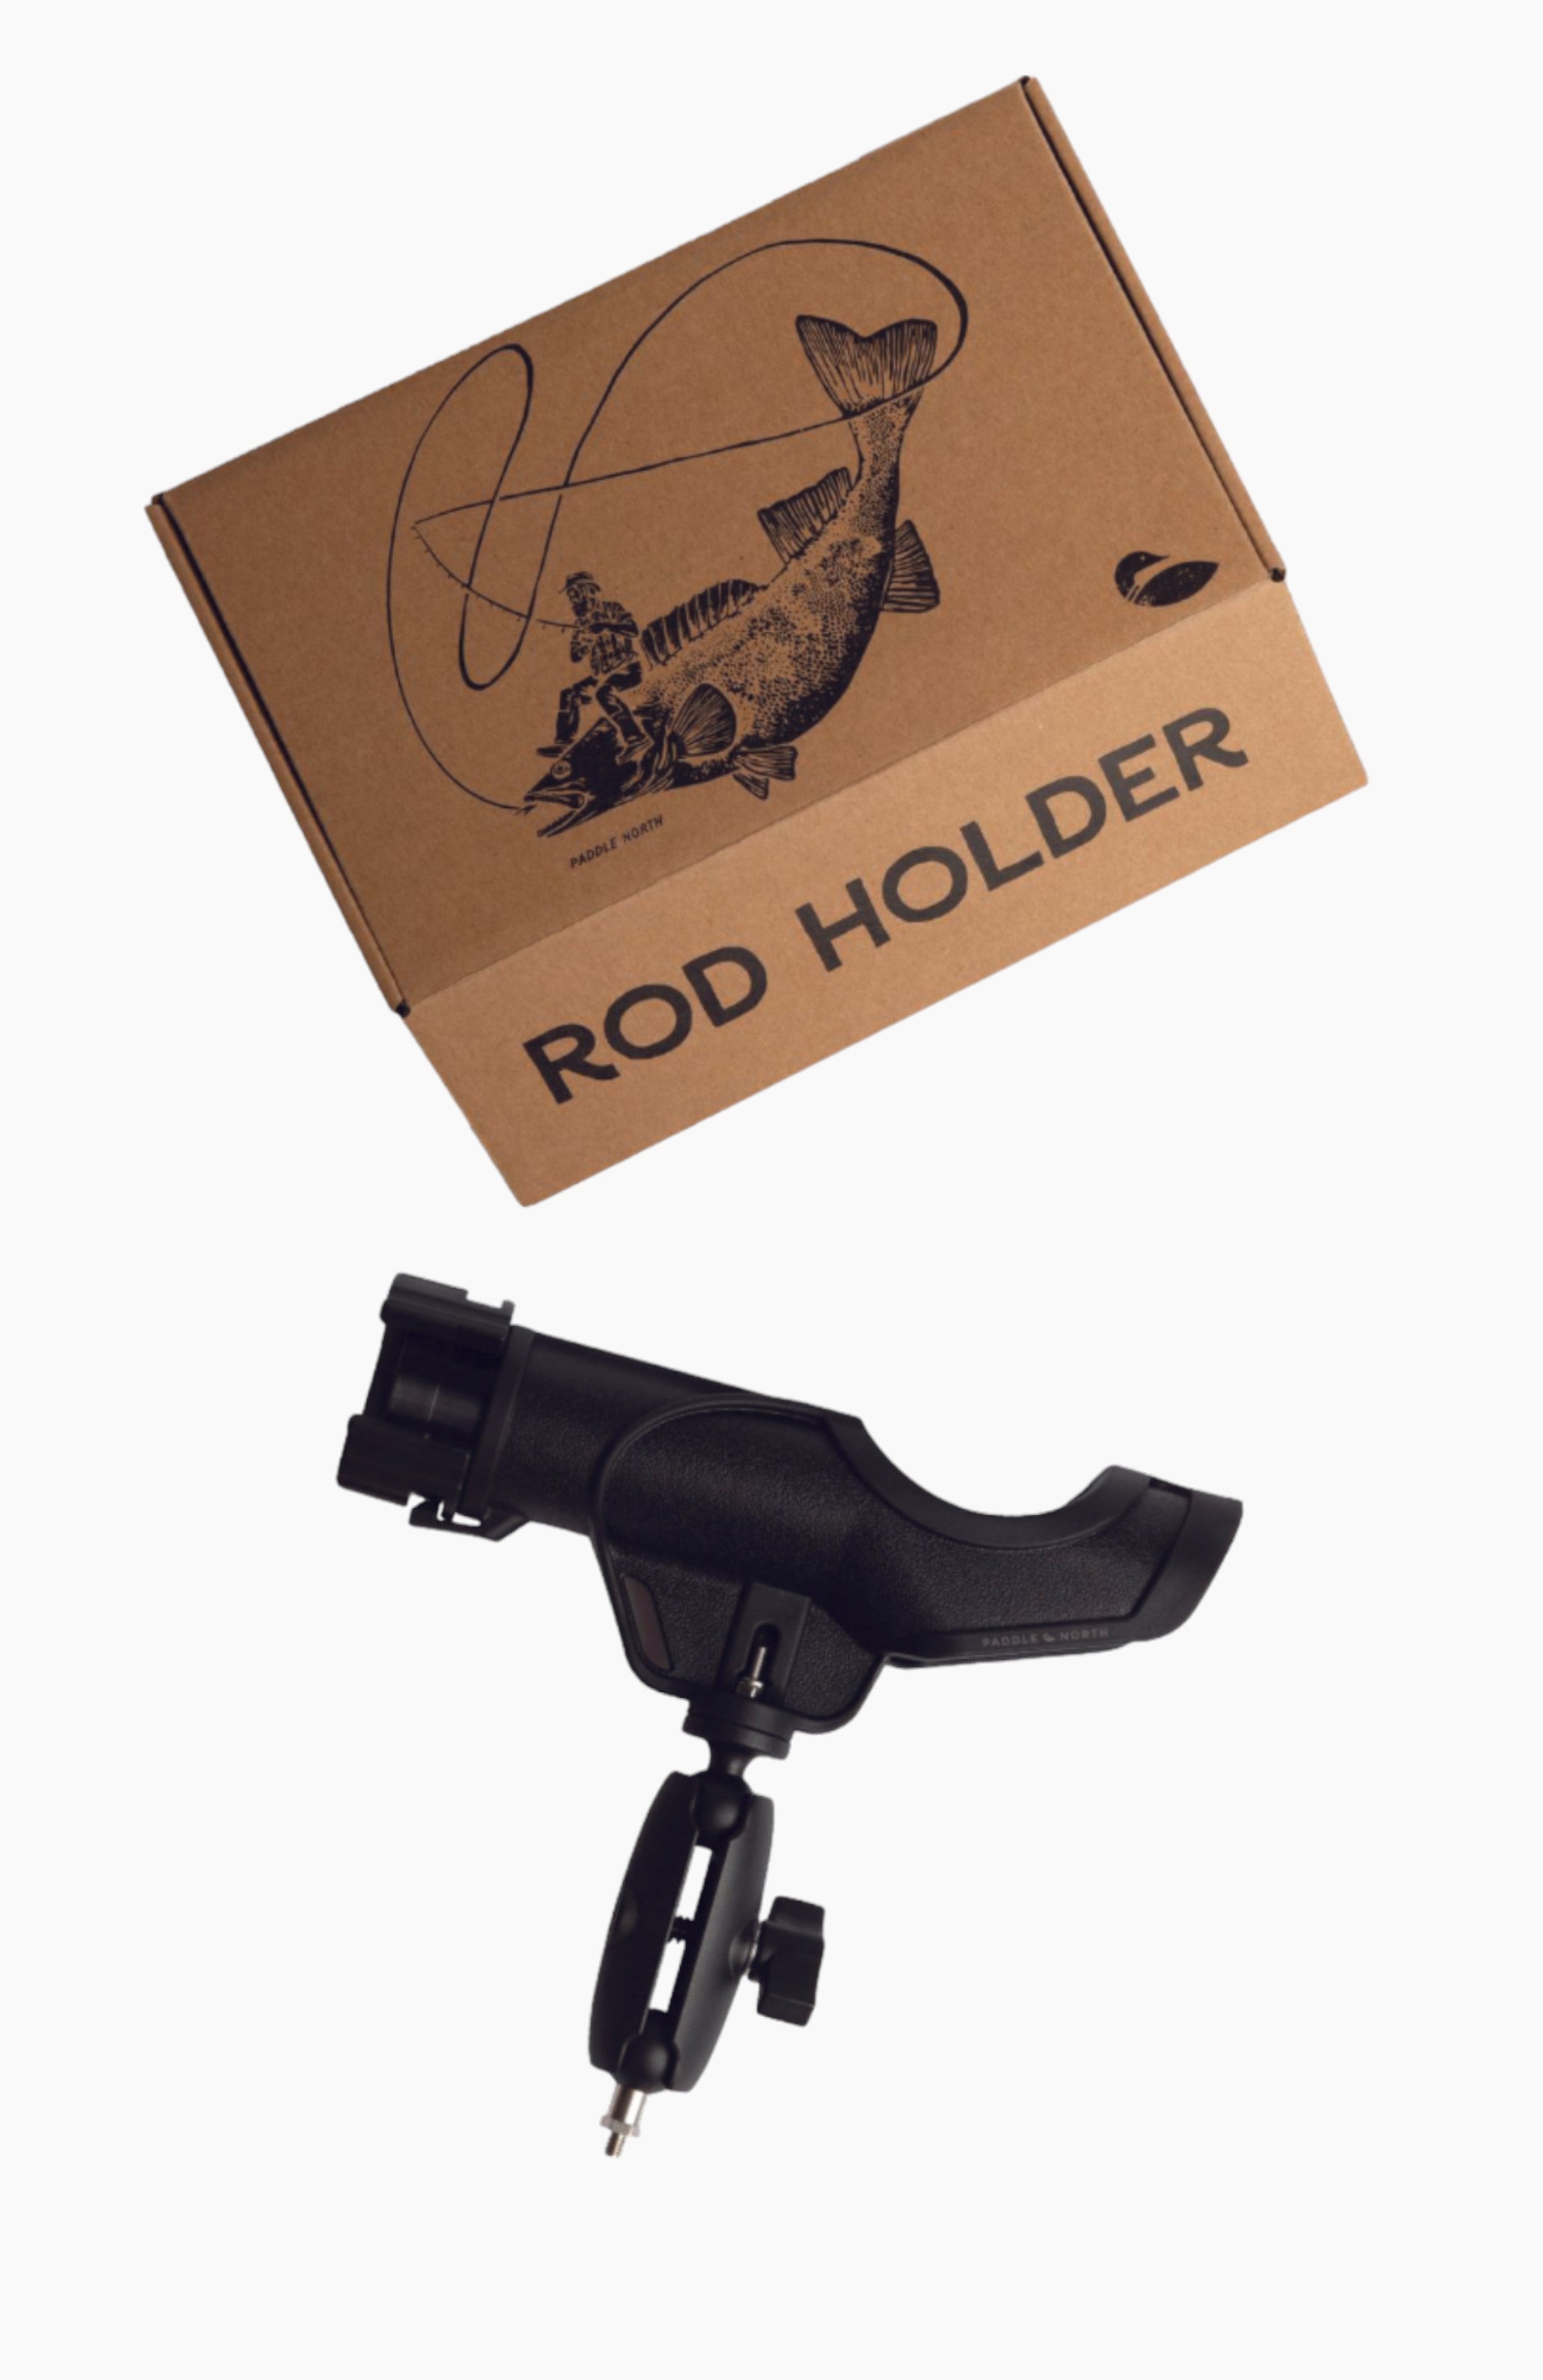 Black fishing rod holder with screw on the bottom for easy install and it's box.